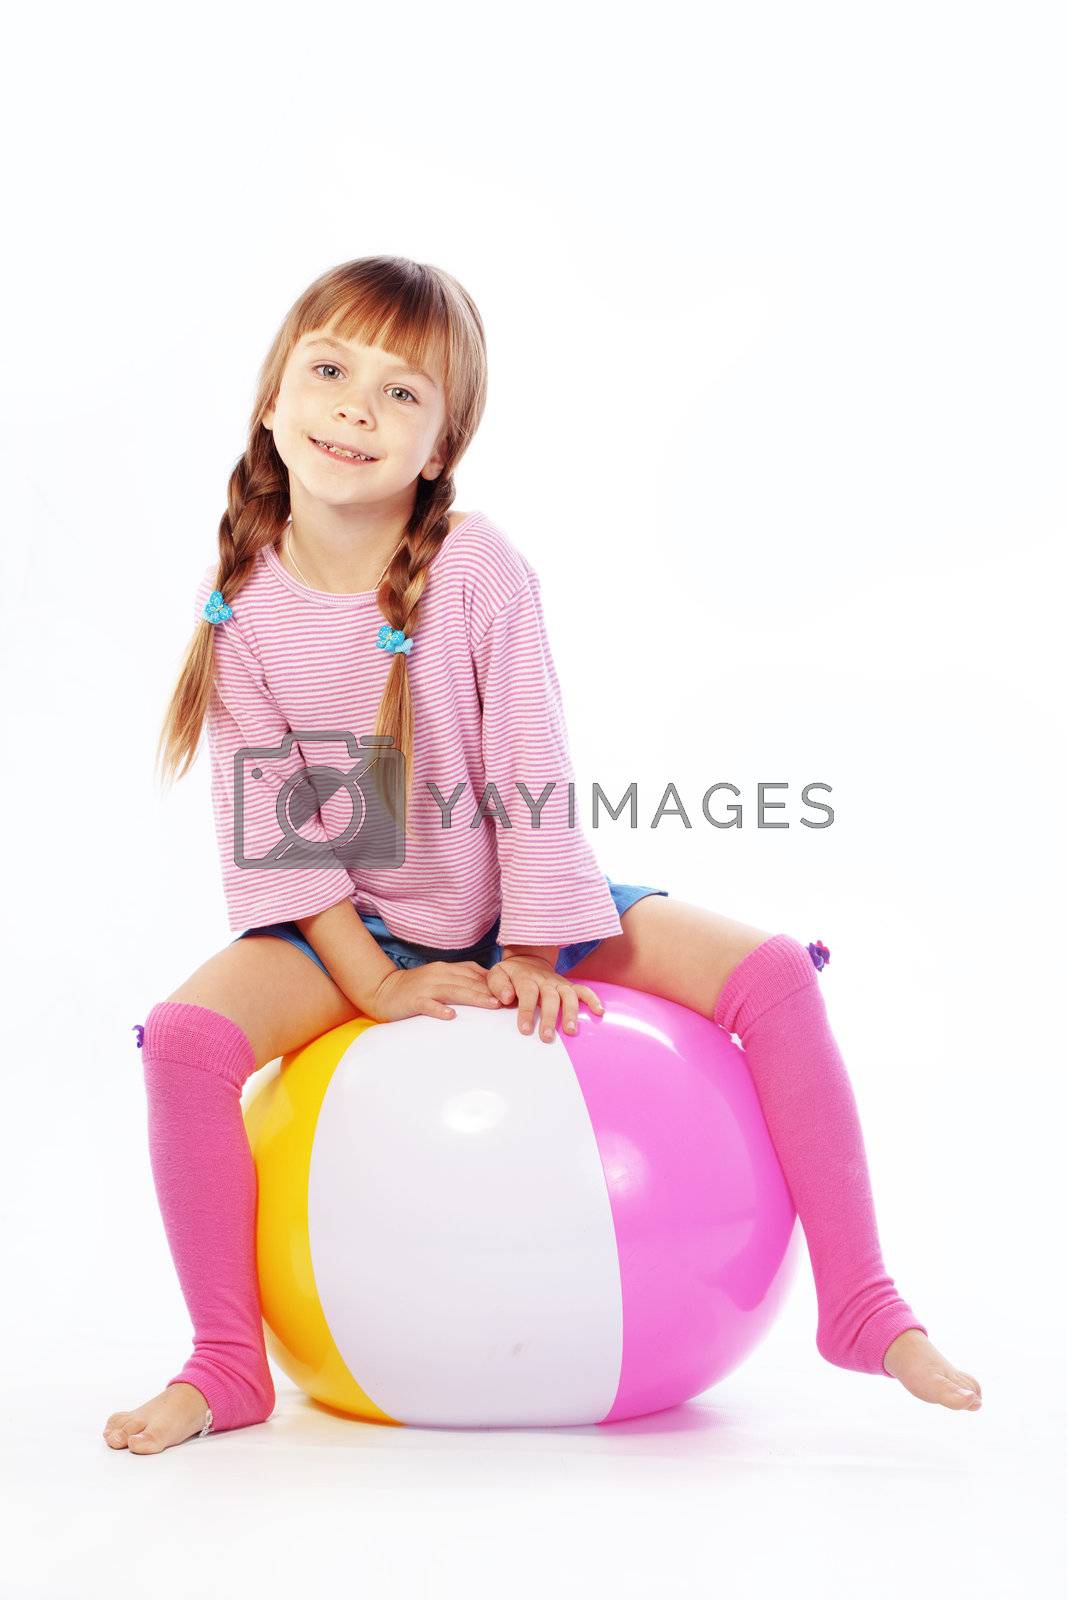 Royalty free image of Girl with ball by alenkasm